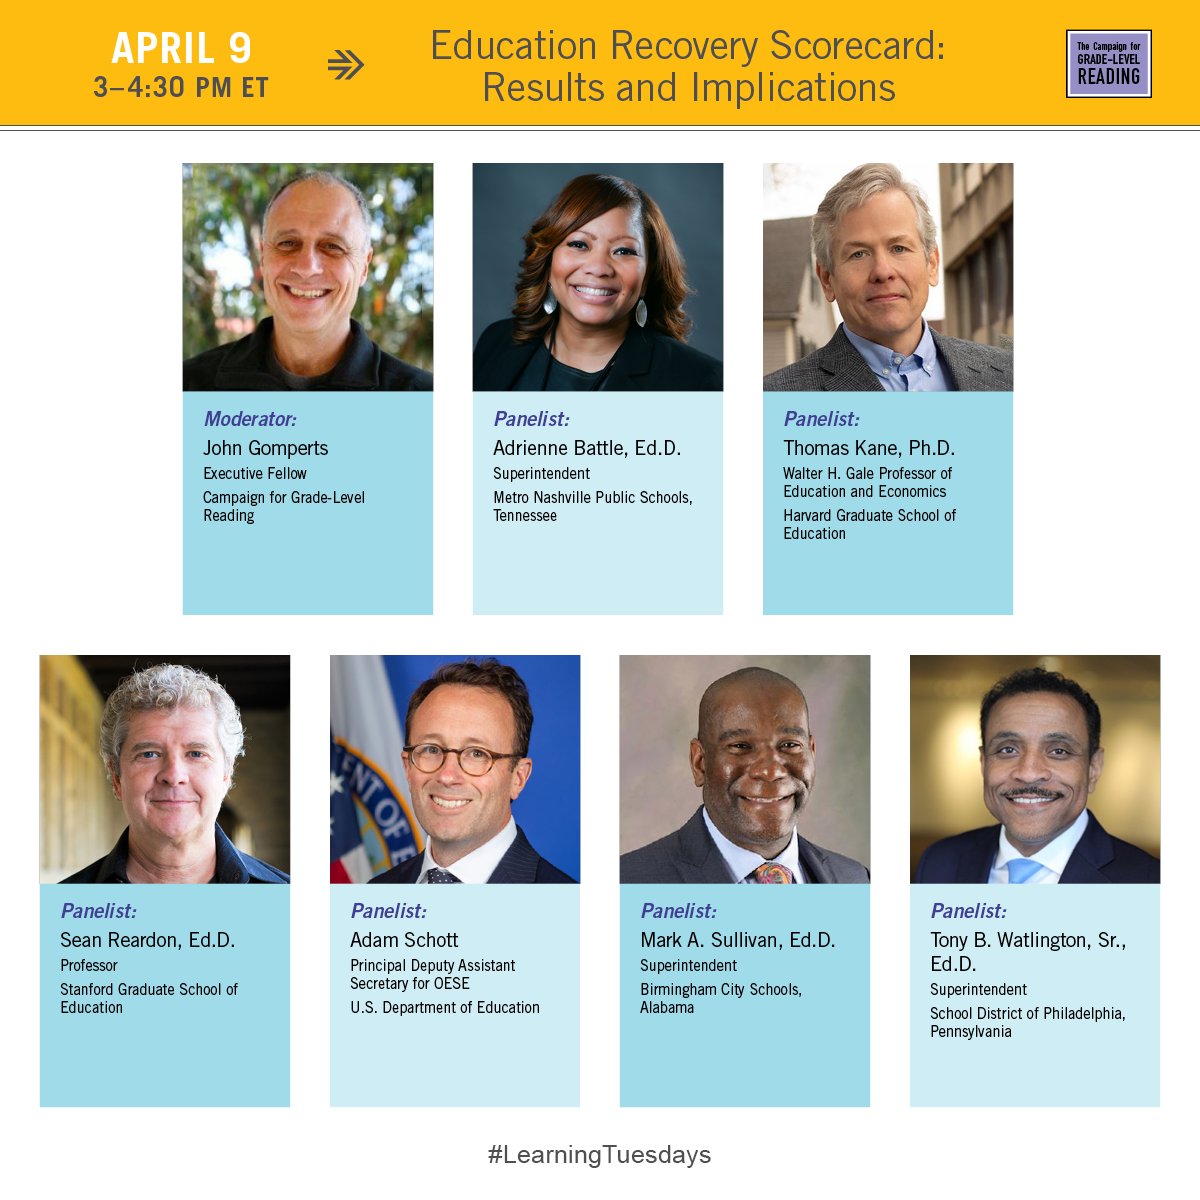 Join @readingby3rd on 4/9 for a special #LearningTuesdays discussing the #EducationRecoveryScorecard w/ researchers from @HGSE @StanfordEd & superintendents from districts that made gains last year: @PHLschools @BhamCitySchools + @MetroSchools. REGISTER: ow.ly/MkVI50Q4MTP